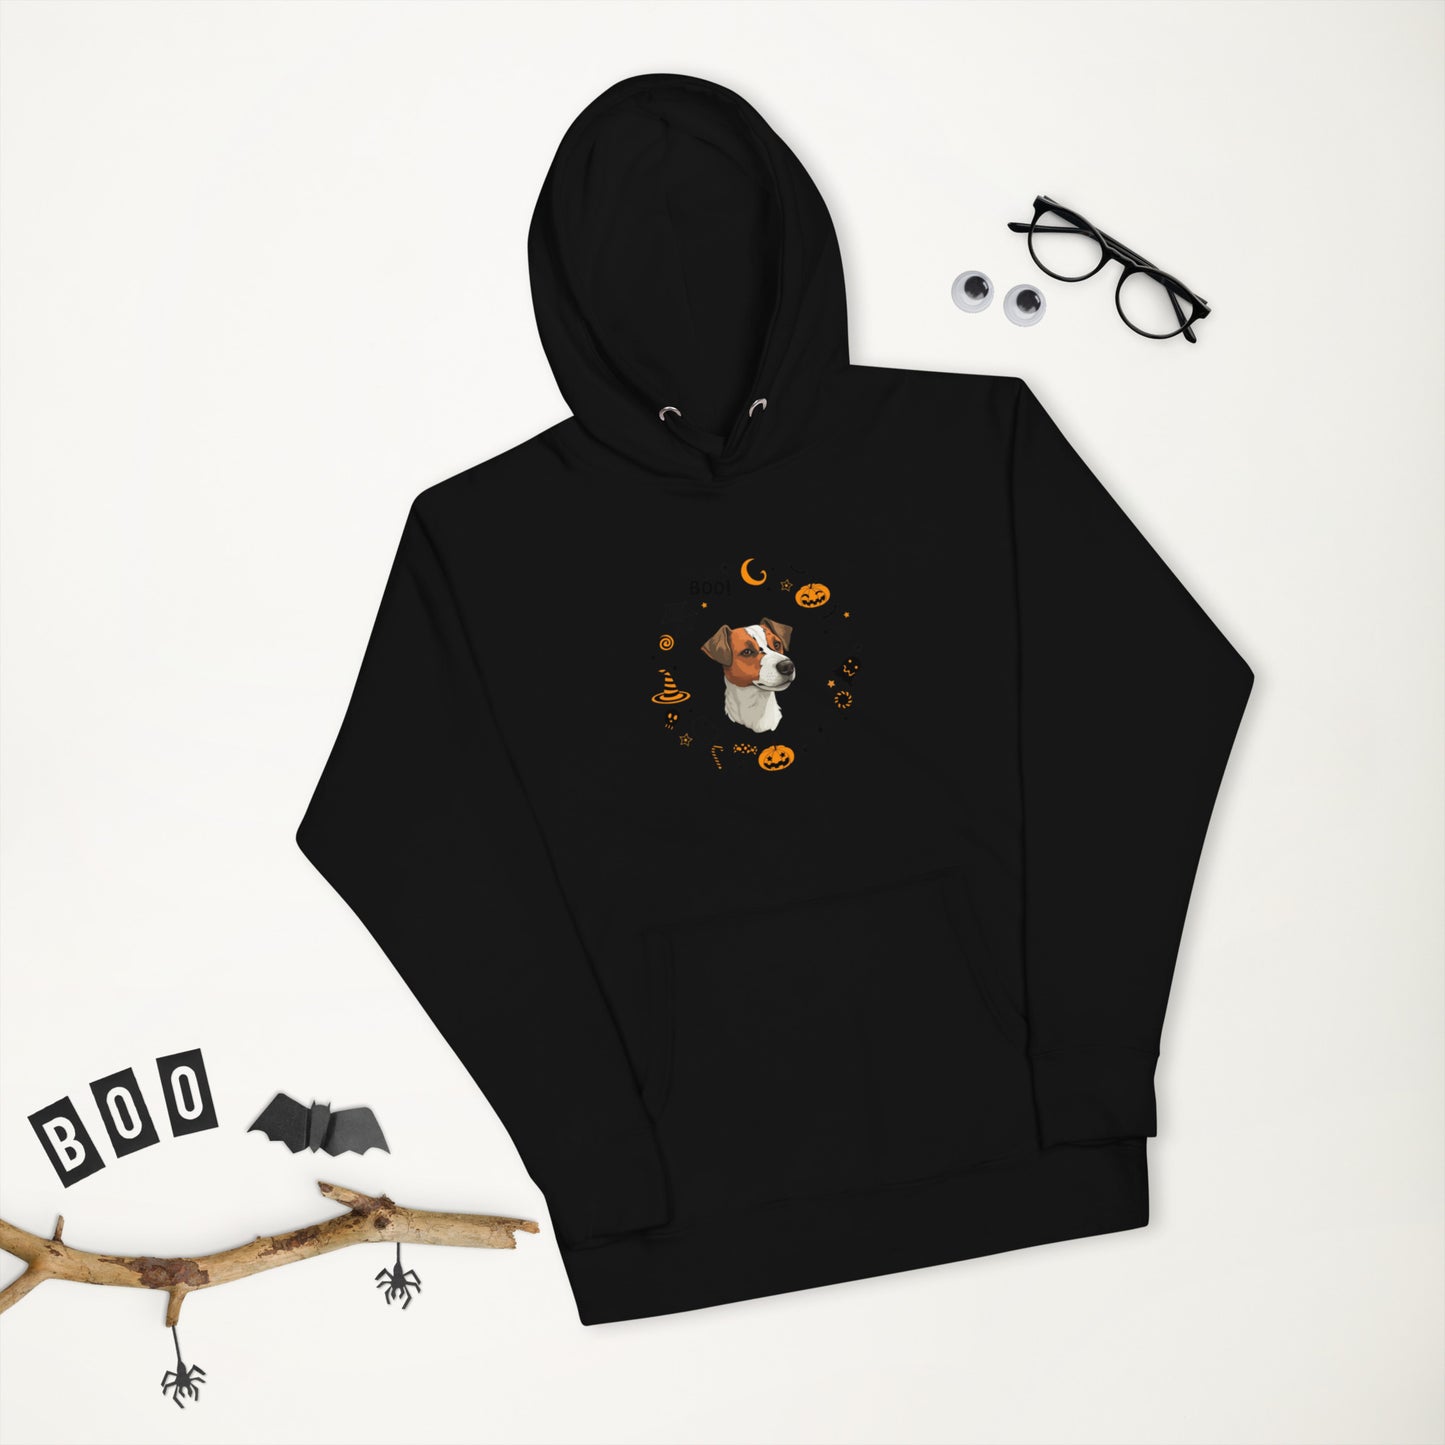 Unisex Hoodie / Jack Russel terrier gift / Parson Russel dog Halloween gift for dog lovers